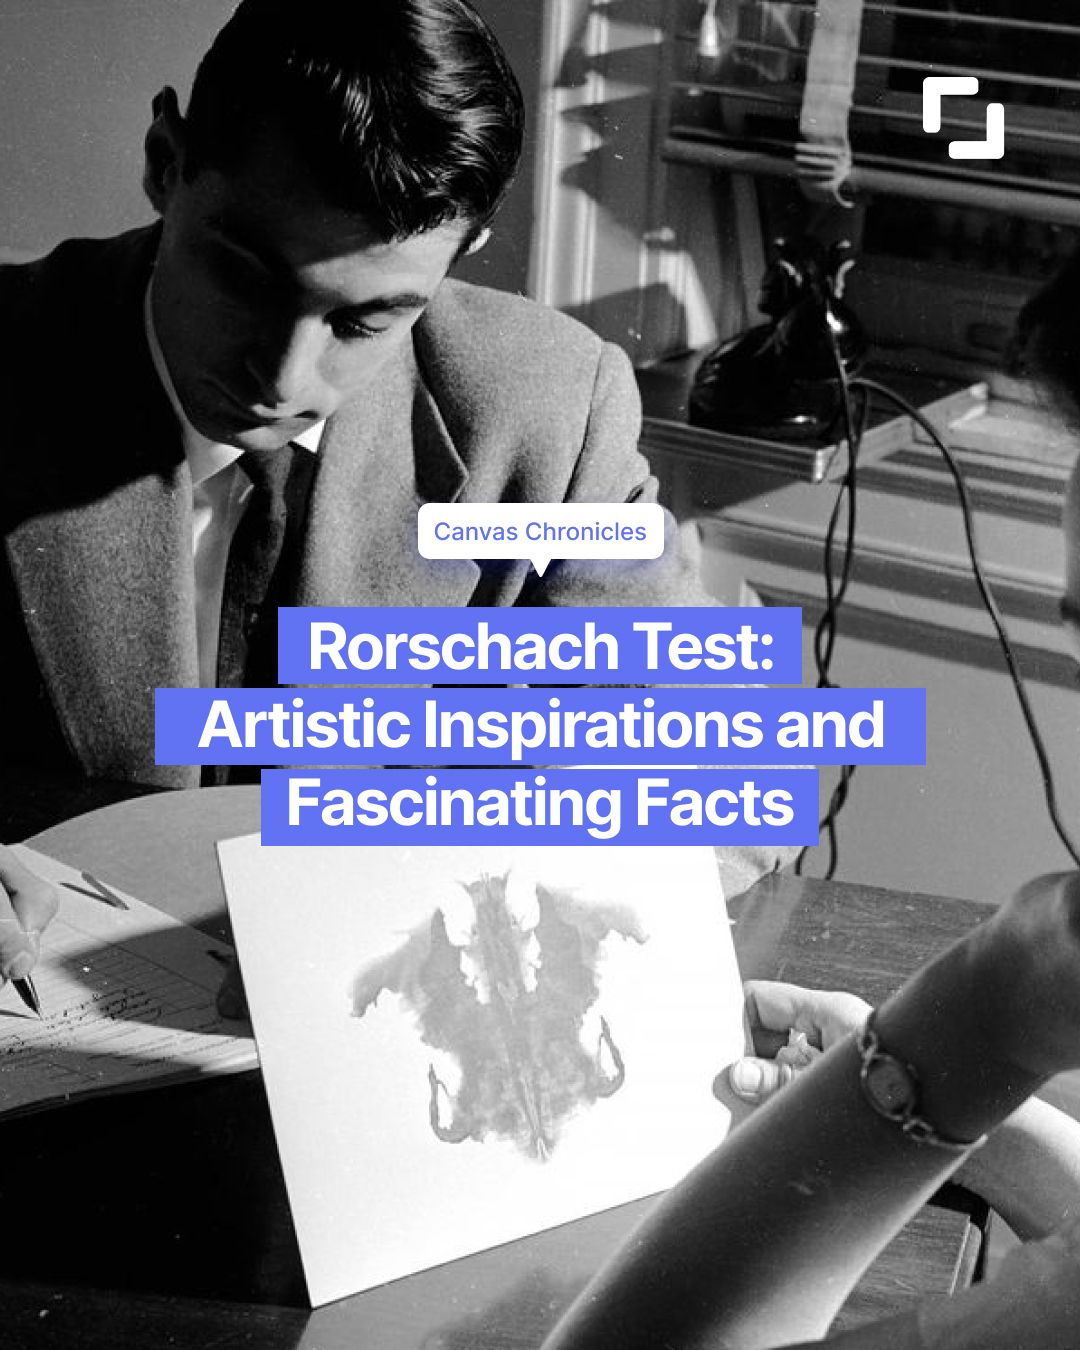 Rorschach Test: Artistic Inspirations and Fascinating Facts